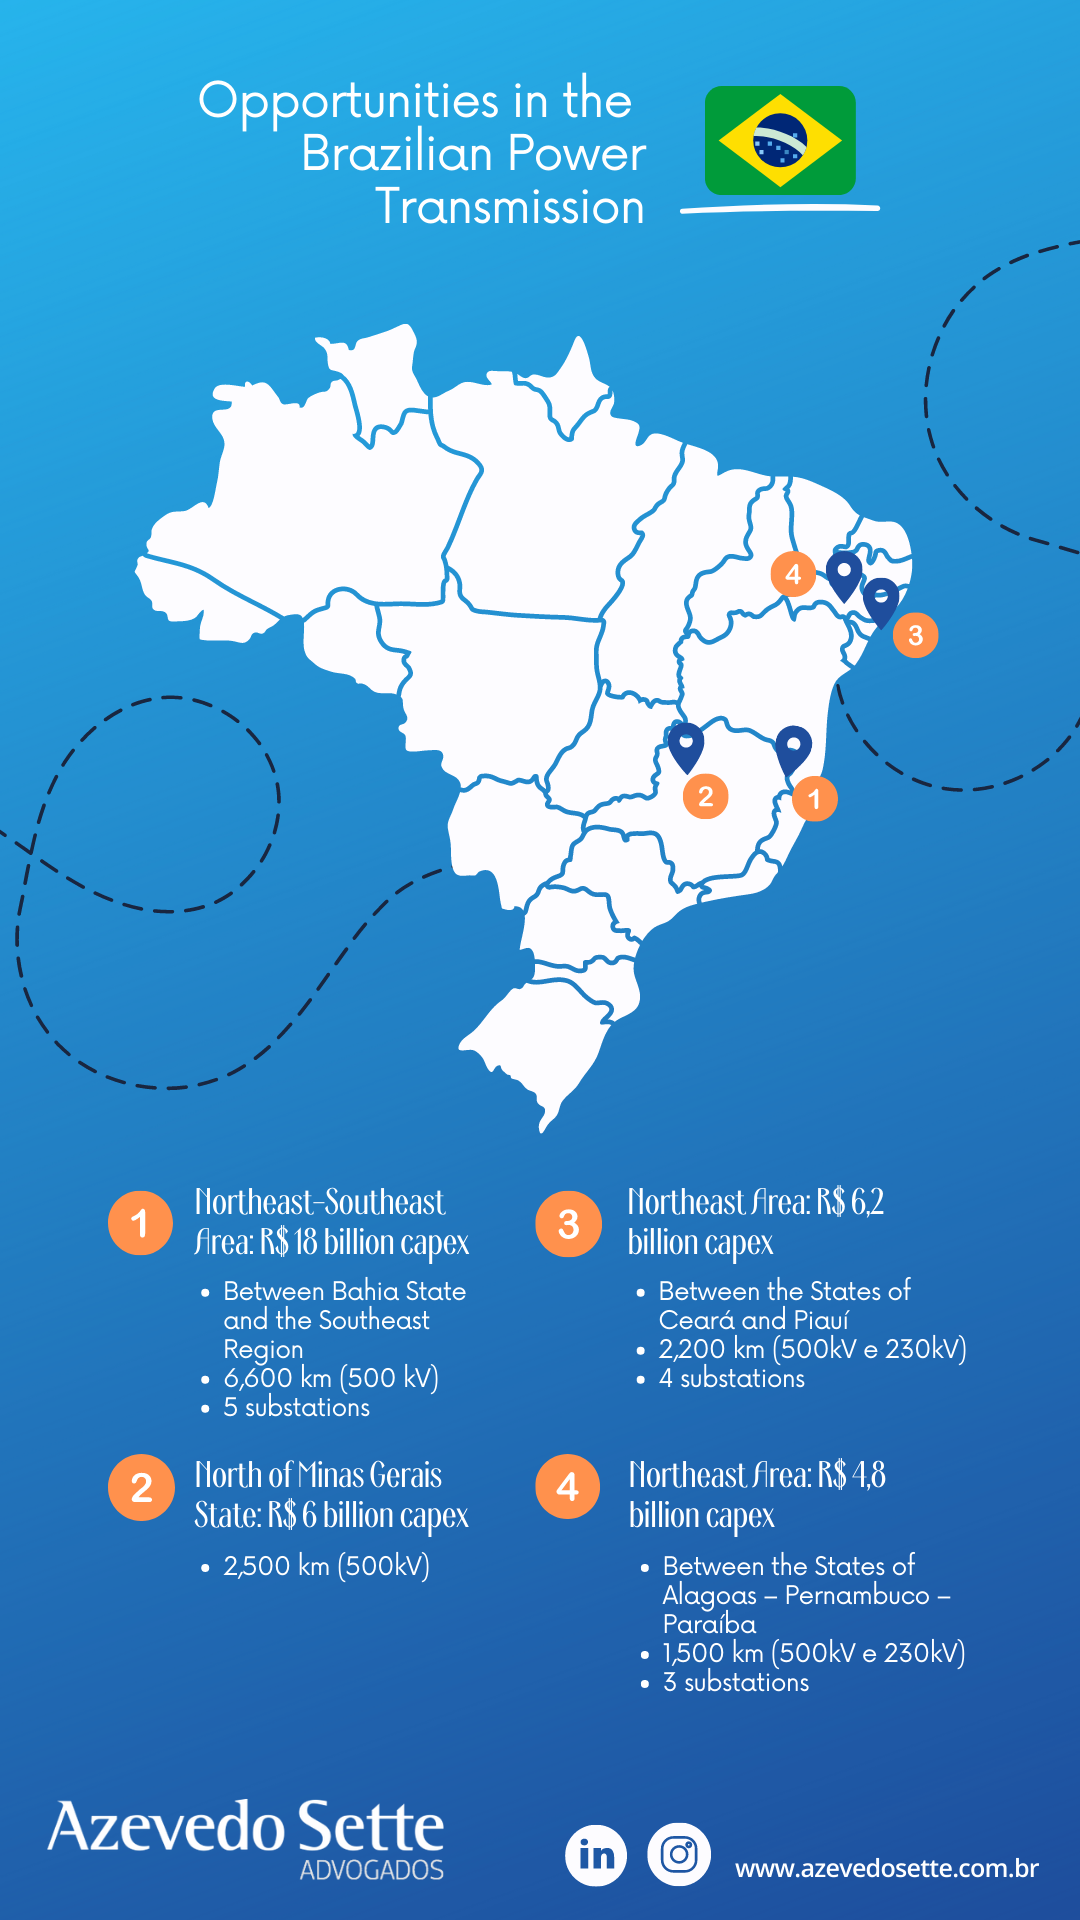 Infrastructure opportunities in the Brazilian Power Transmission and Hydrogen sectors 